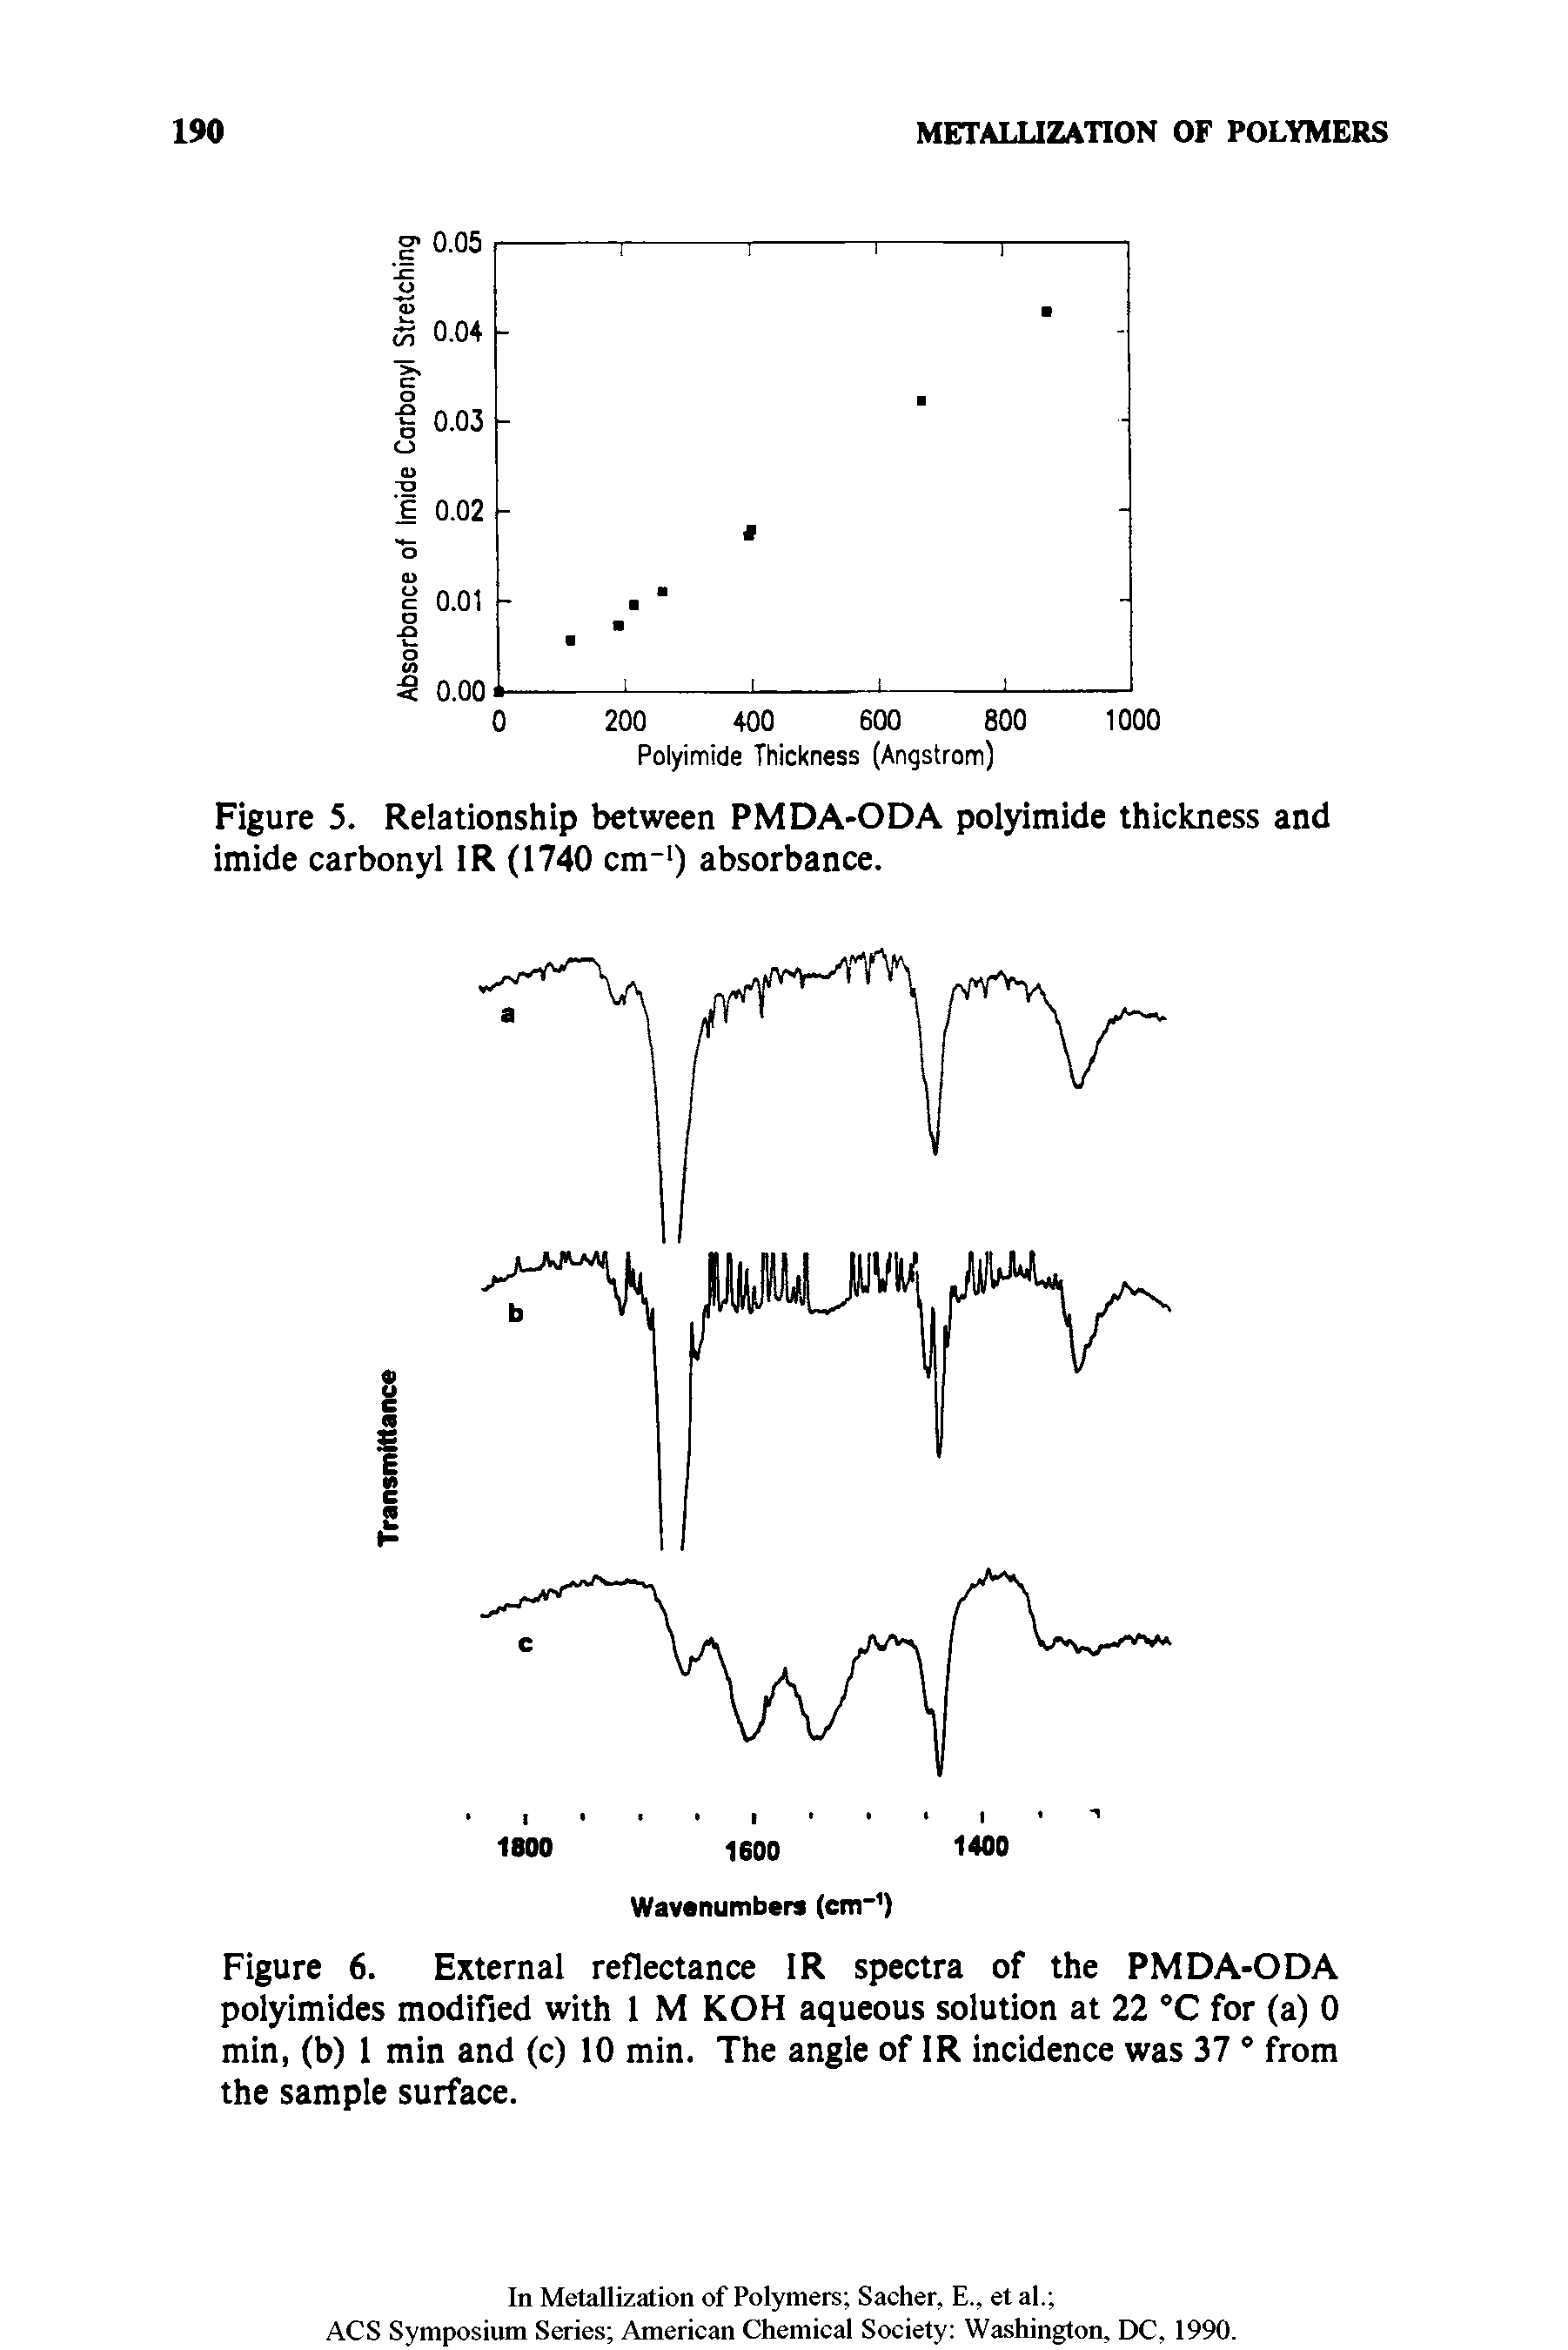 Figure 5. Relationship between PMDA-ODA polyimide thickness and imide carbonyl 1R (1740 cm-1) absorbance.